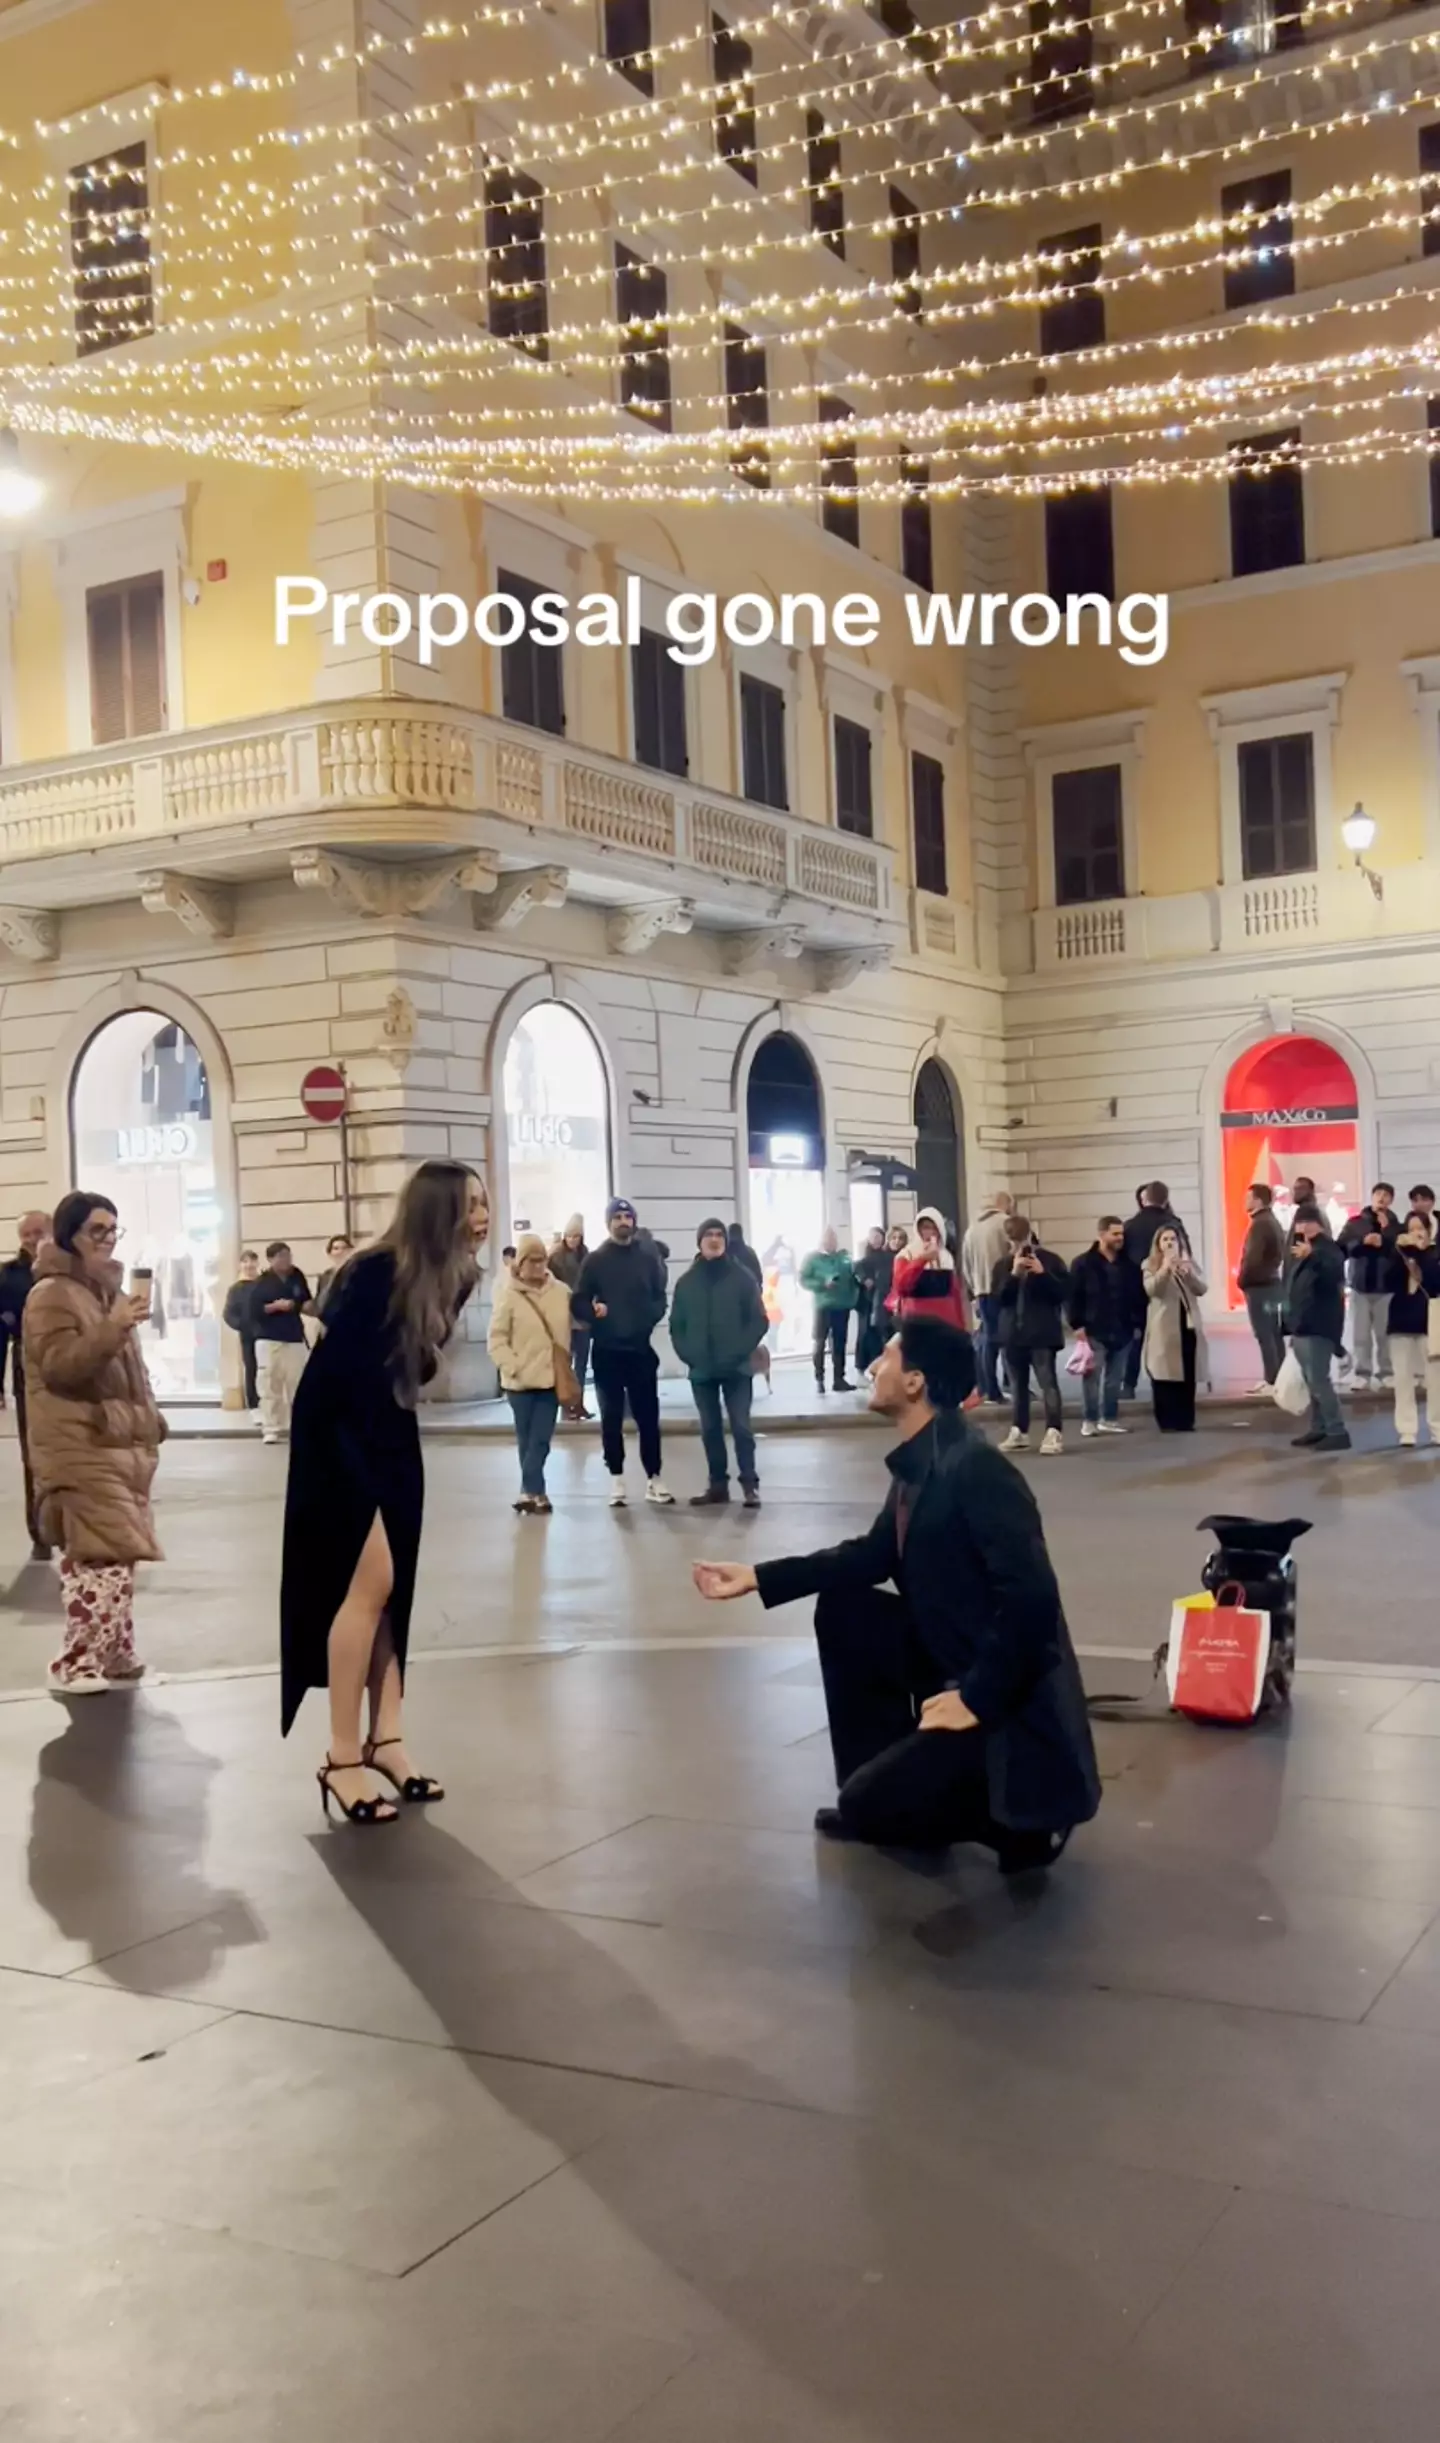 Things went very wrong when a man's public proposal in Rome was rejected.